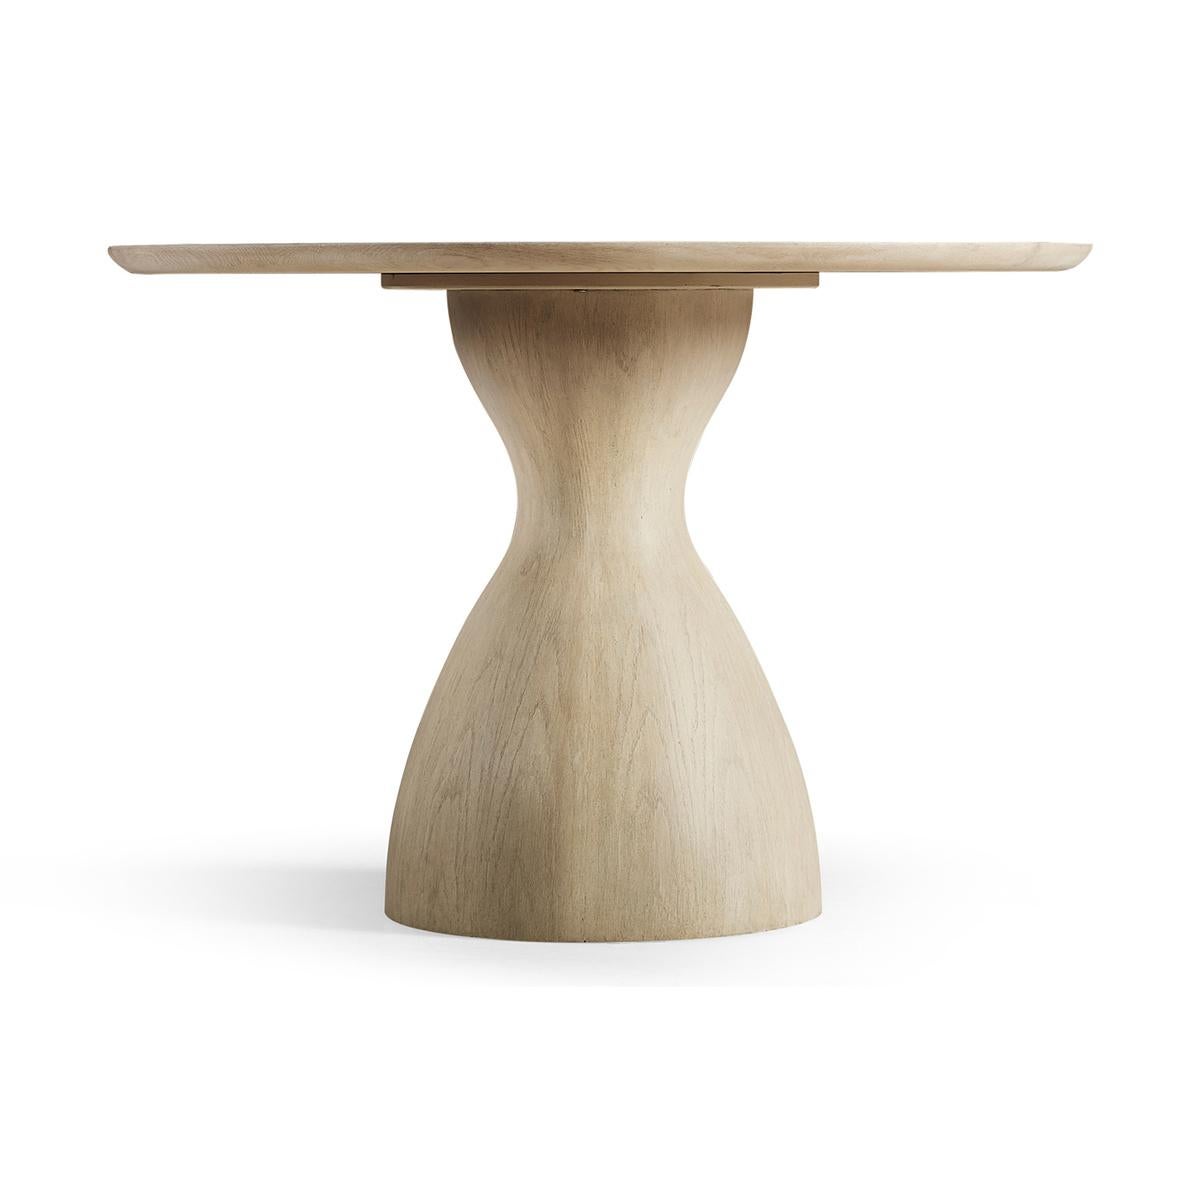 Organic Modern oak pedestal dining table. Unending symmetry, remarkable simplicity and true down-to-Earth balance come together in expertly crafted solid hardwoods and veneers finished in bleached oak. A wood top features a center cut out revealing